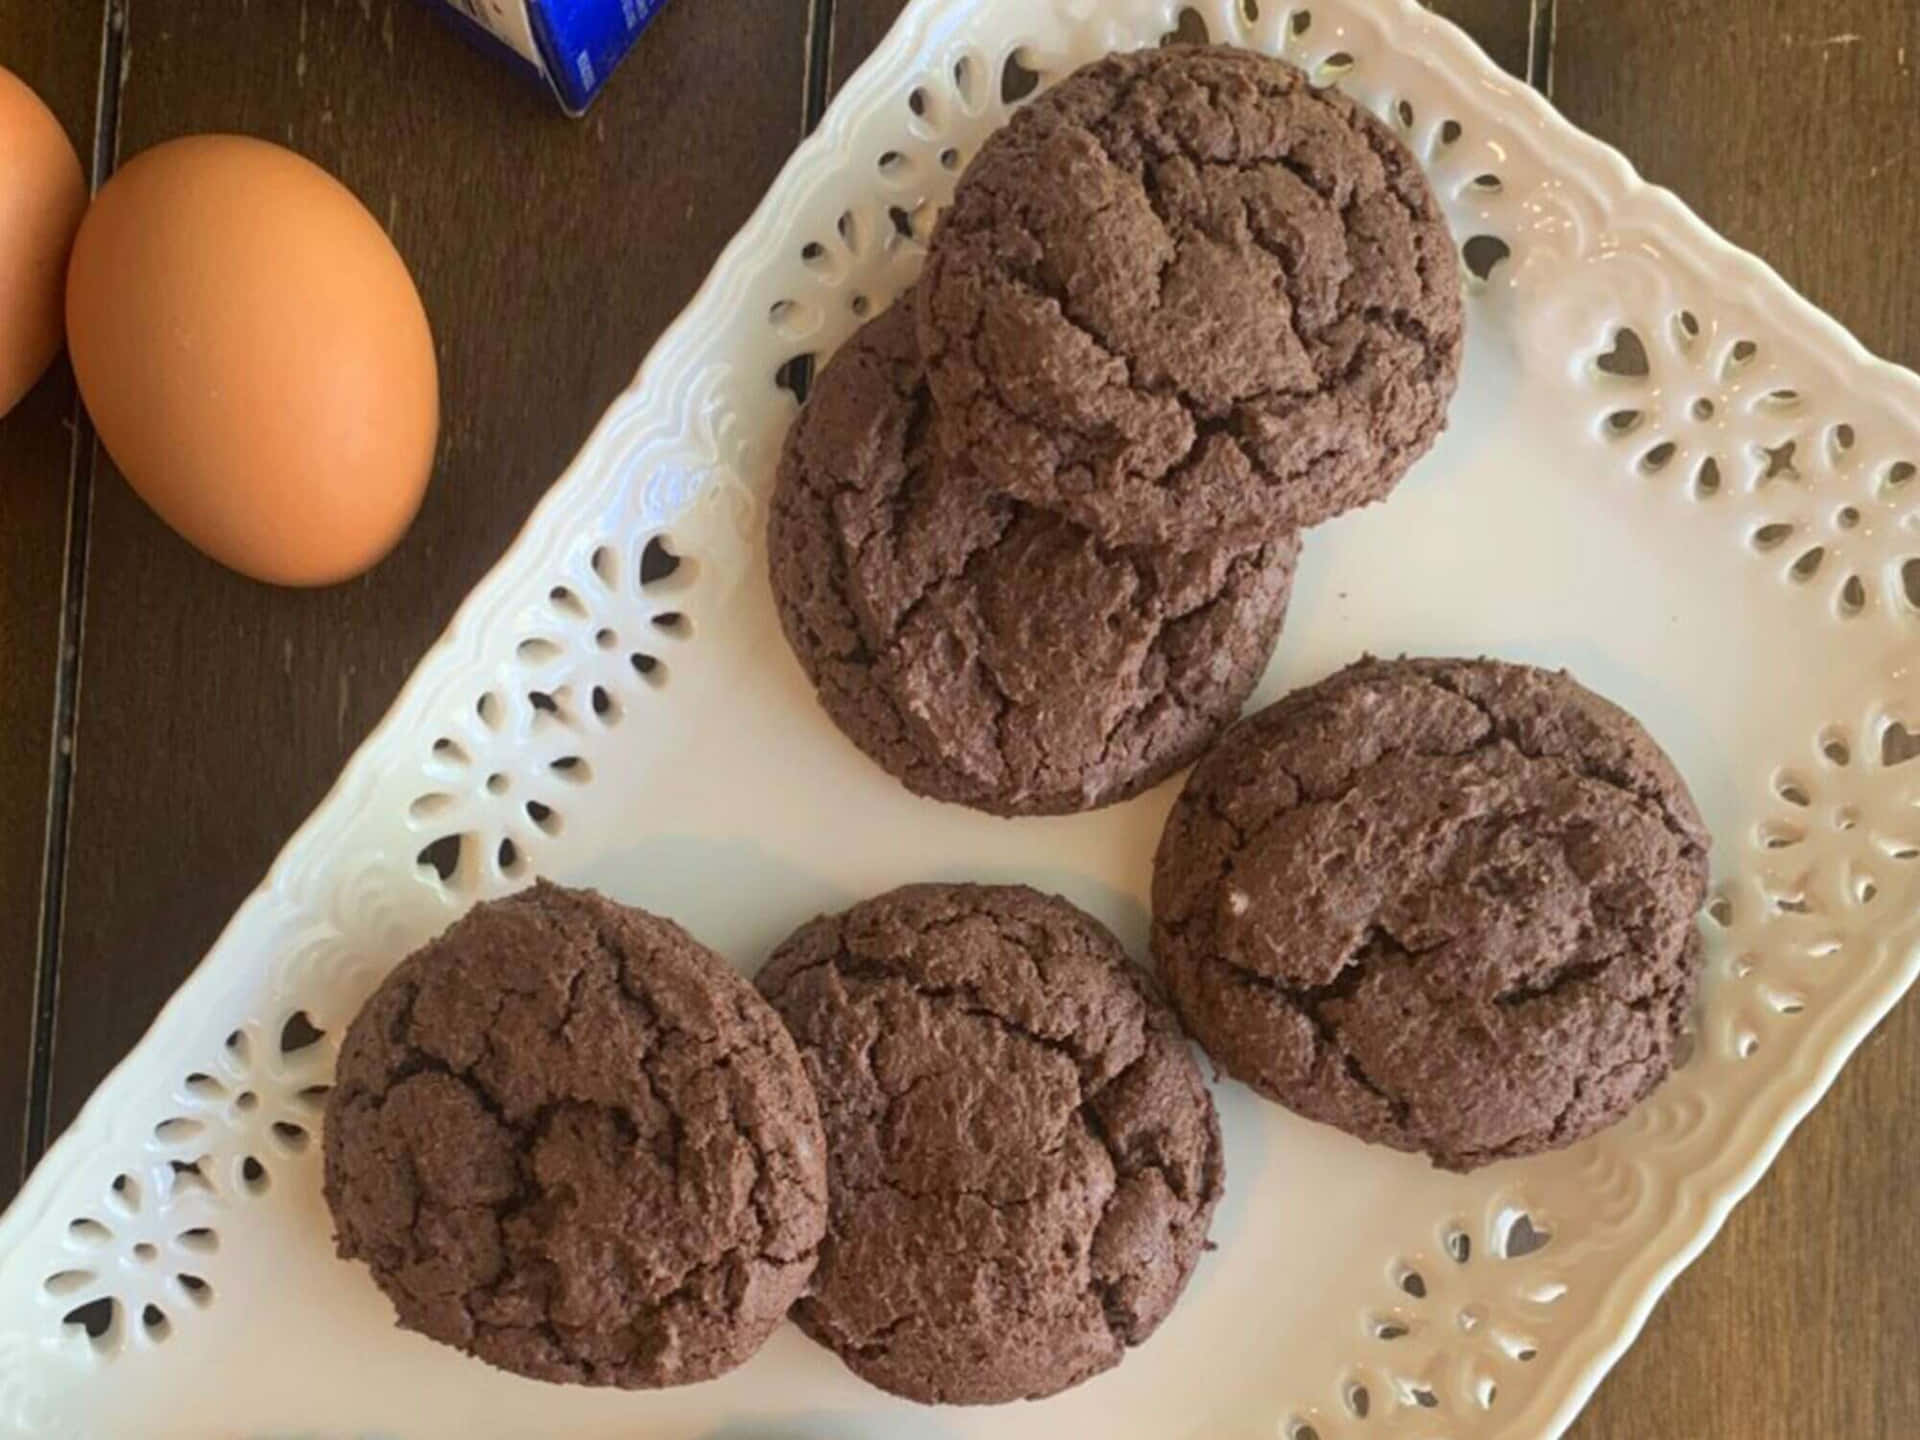 Chocolate Cookies On A Plate With Eggs